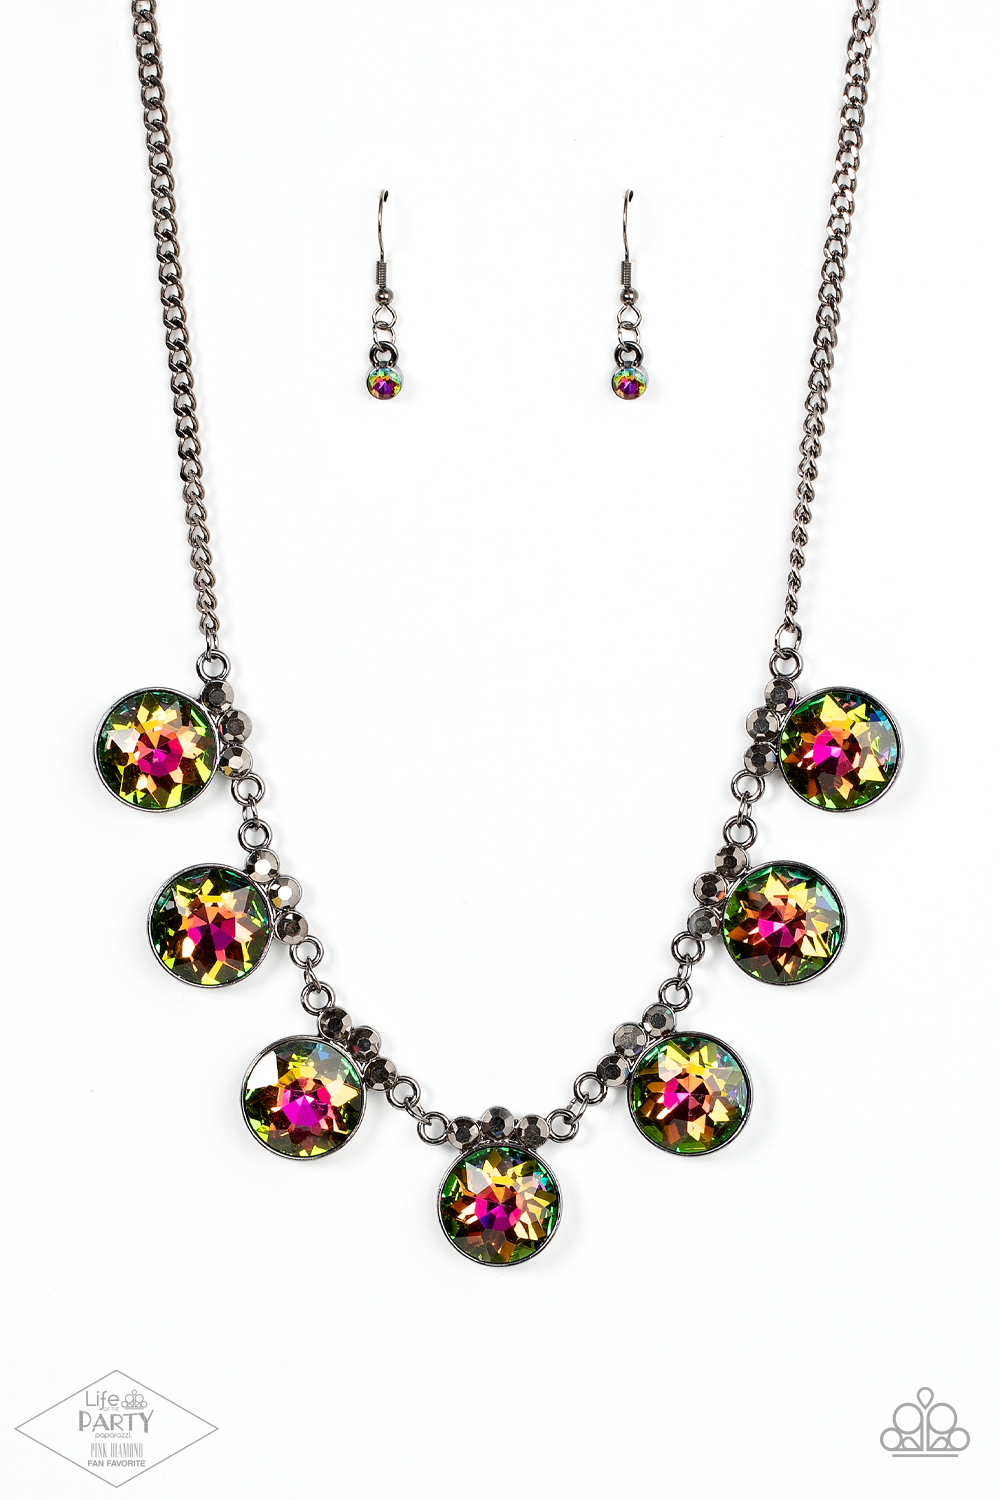 Necklace - GLOW-Getter Glamour - Multi